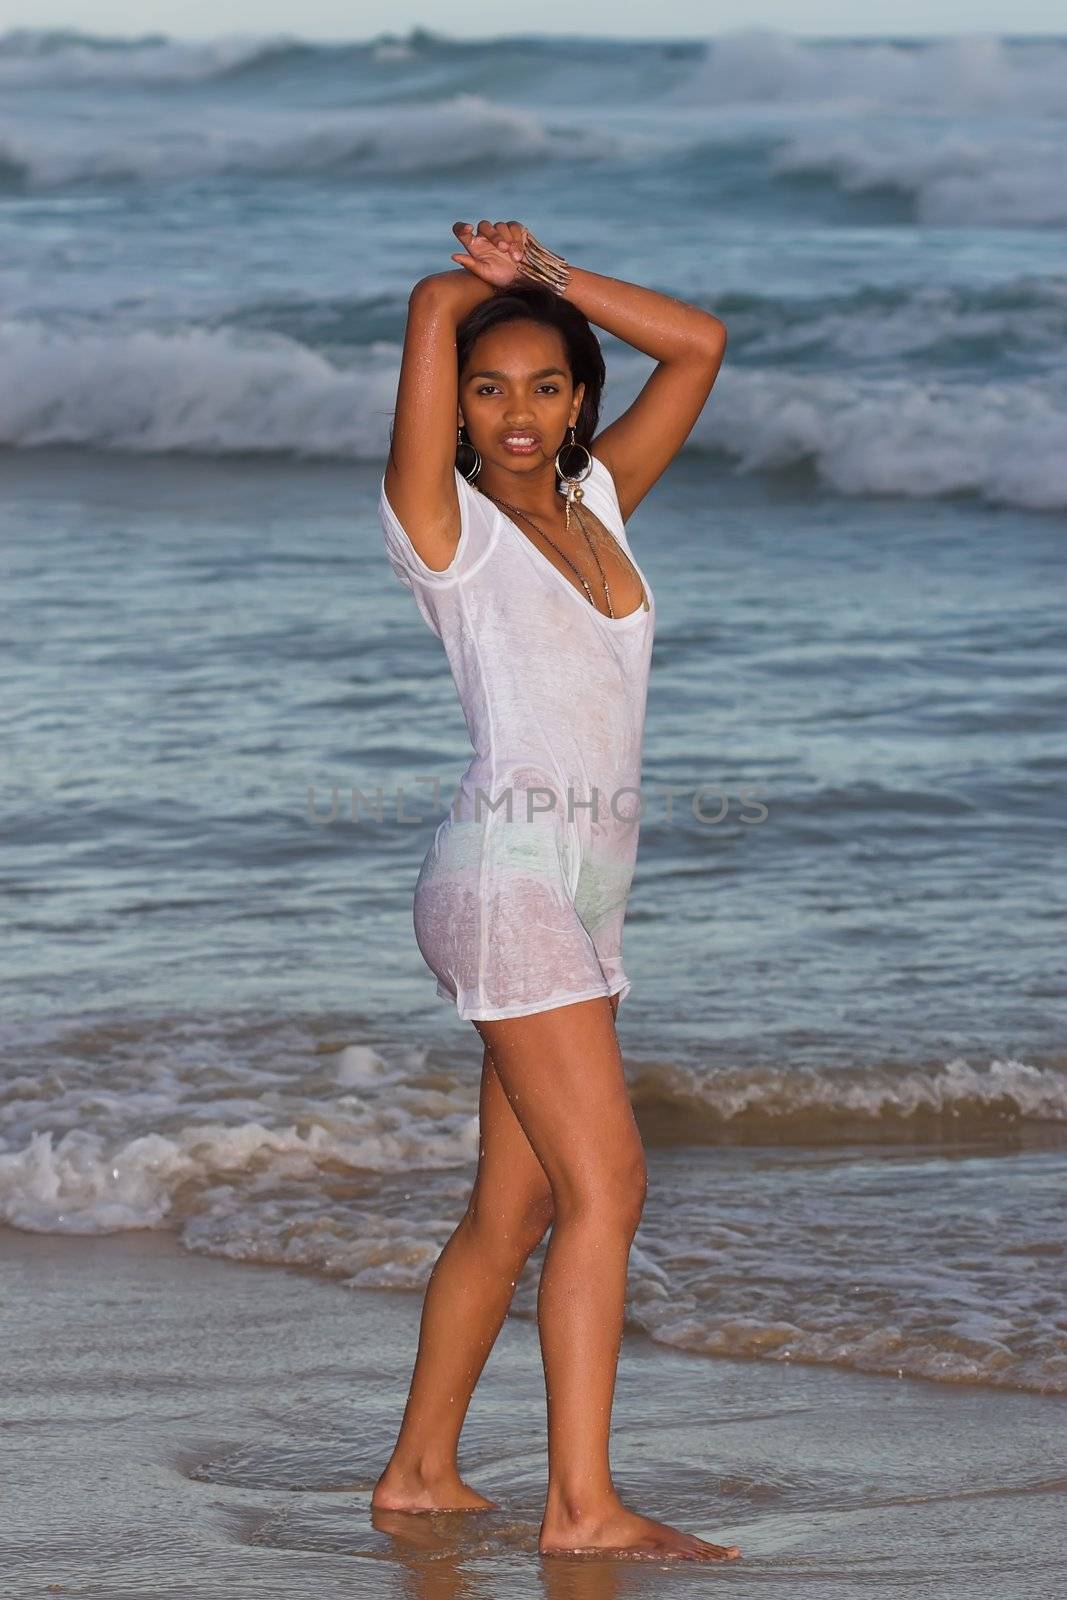 Ethnic Girl in wet t-shirt at the beach